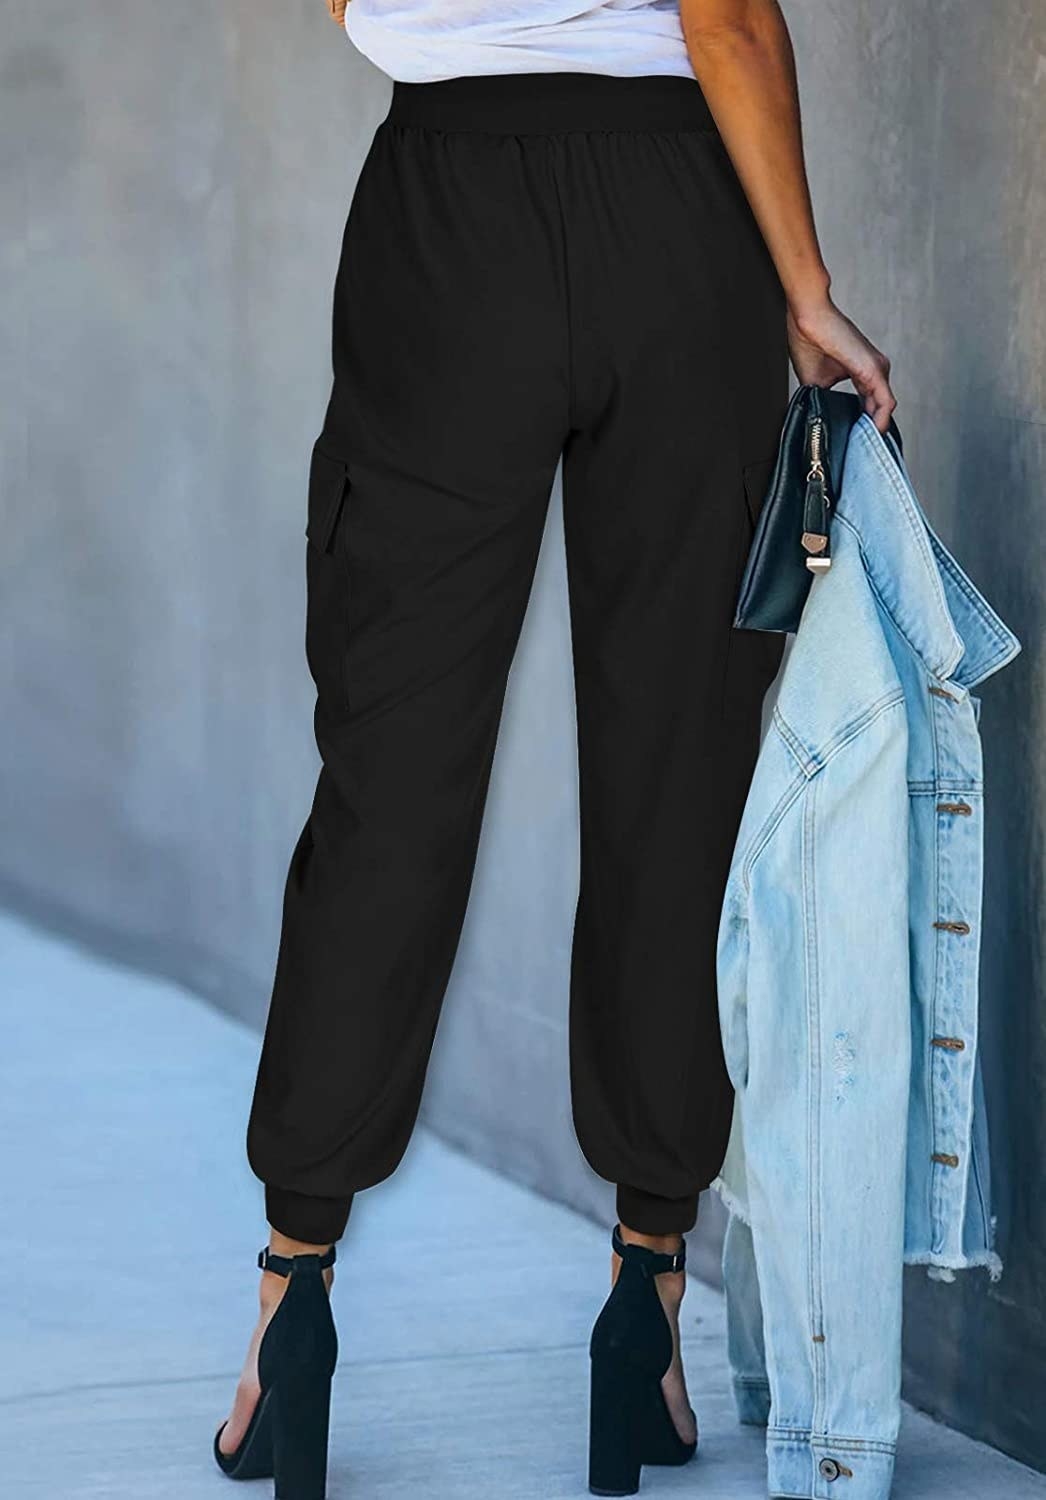 29 Pants That Aren't Sweats, But Might As Well Be